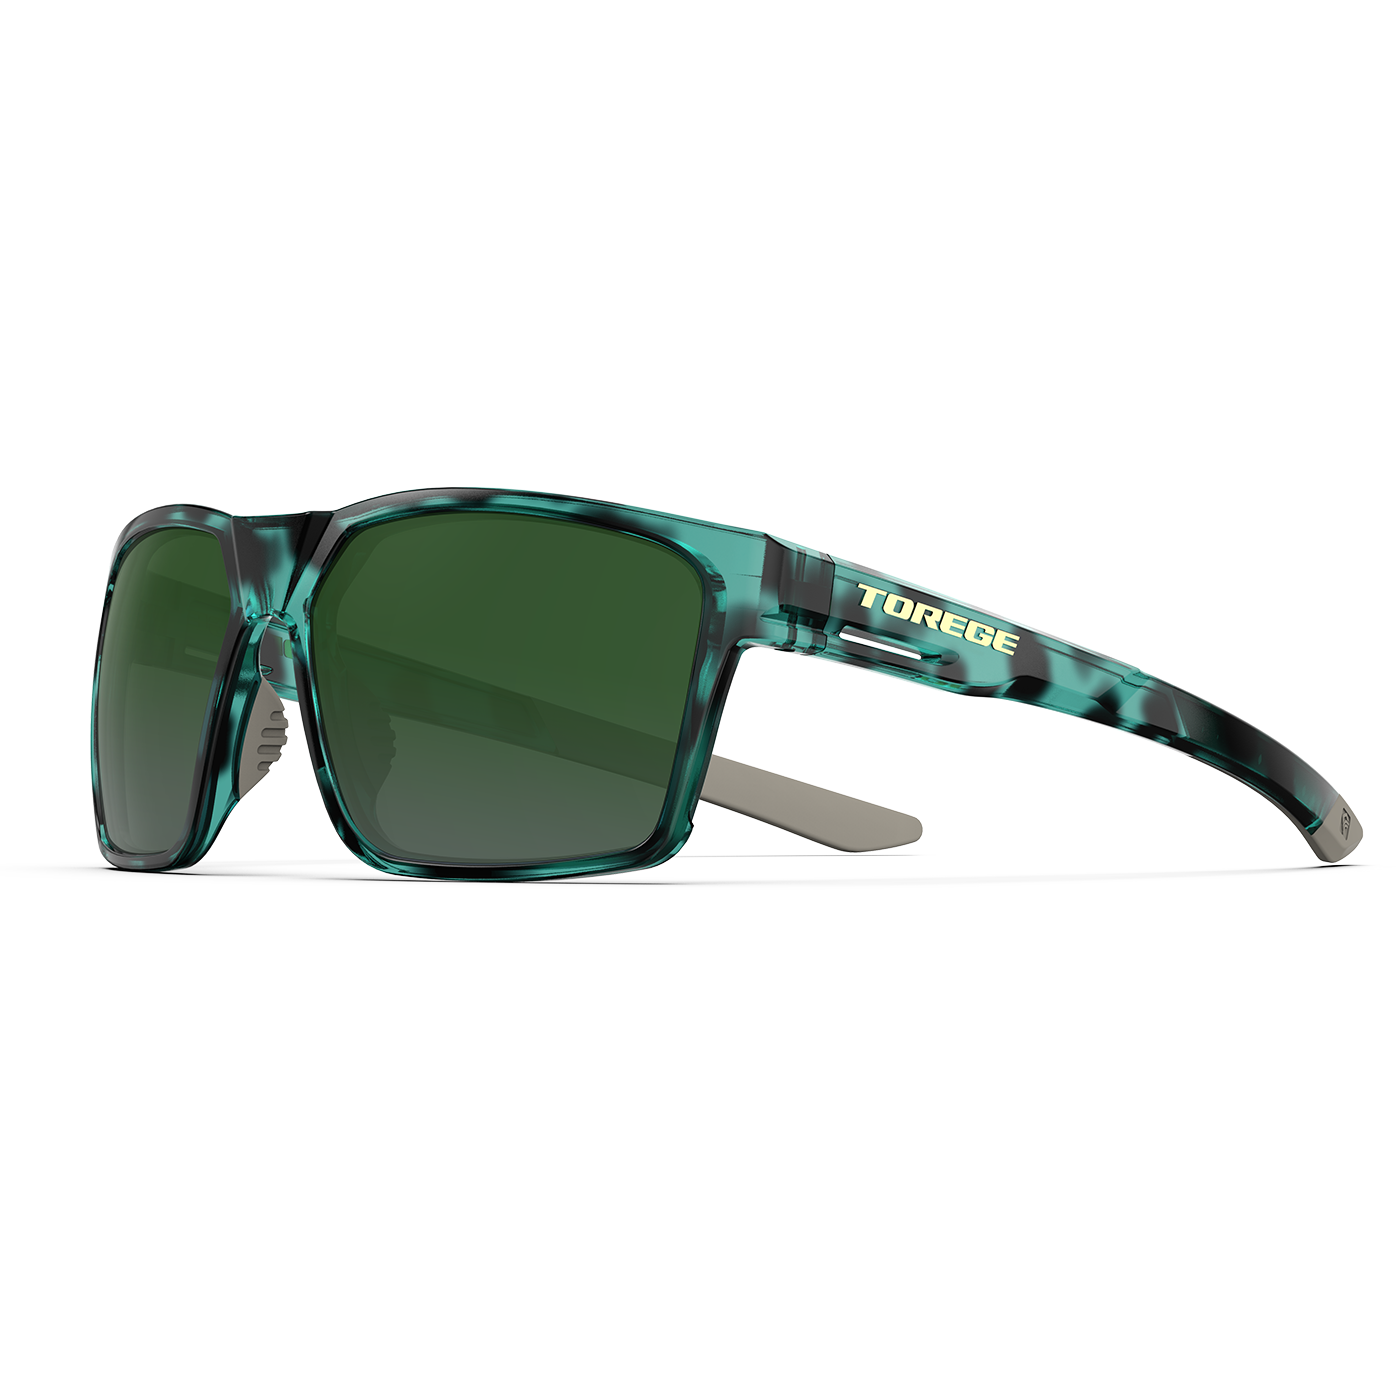 Luxury Mens Polarized Non Polarized Sunglasses With Memory Beam, Spring  Legs, Green Paint, And Blue Film Square Frames Includes Luxury Box From  Tanqia, $21.14